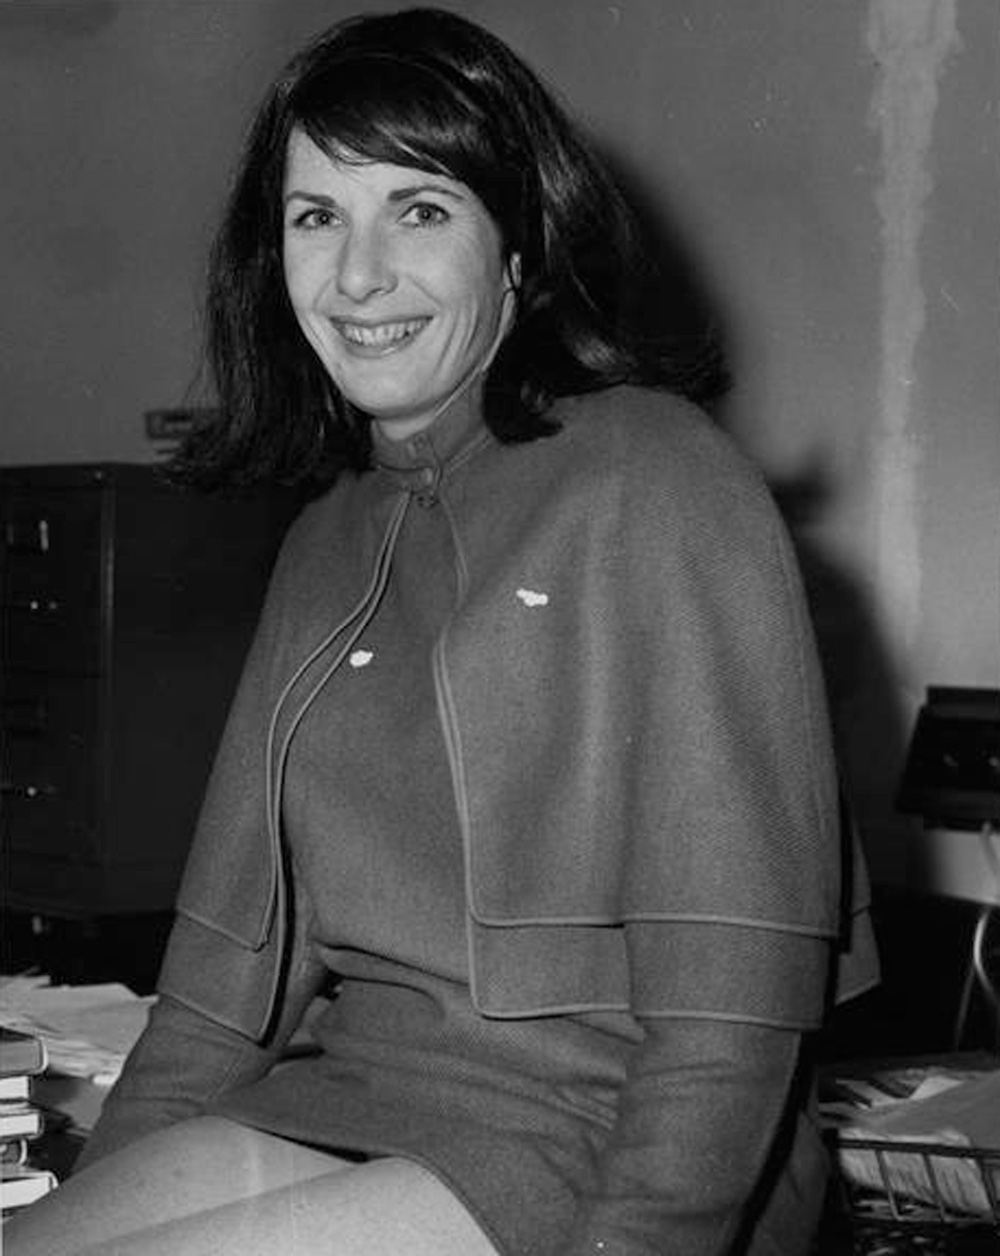 A woman is sitting on a desk and smiling at the camera.